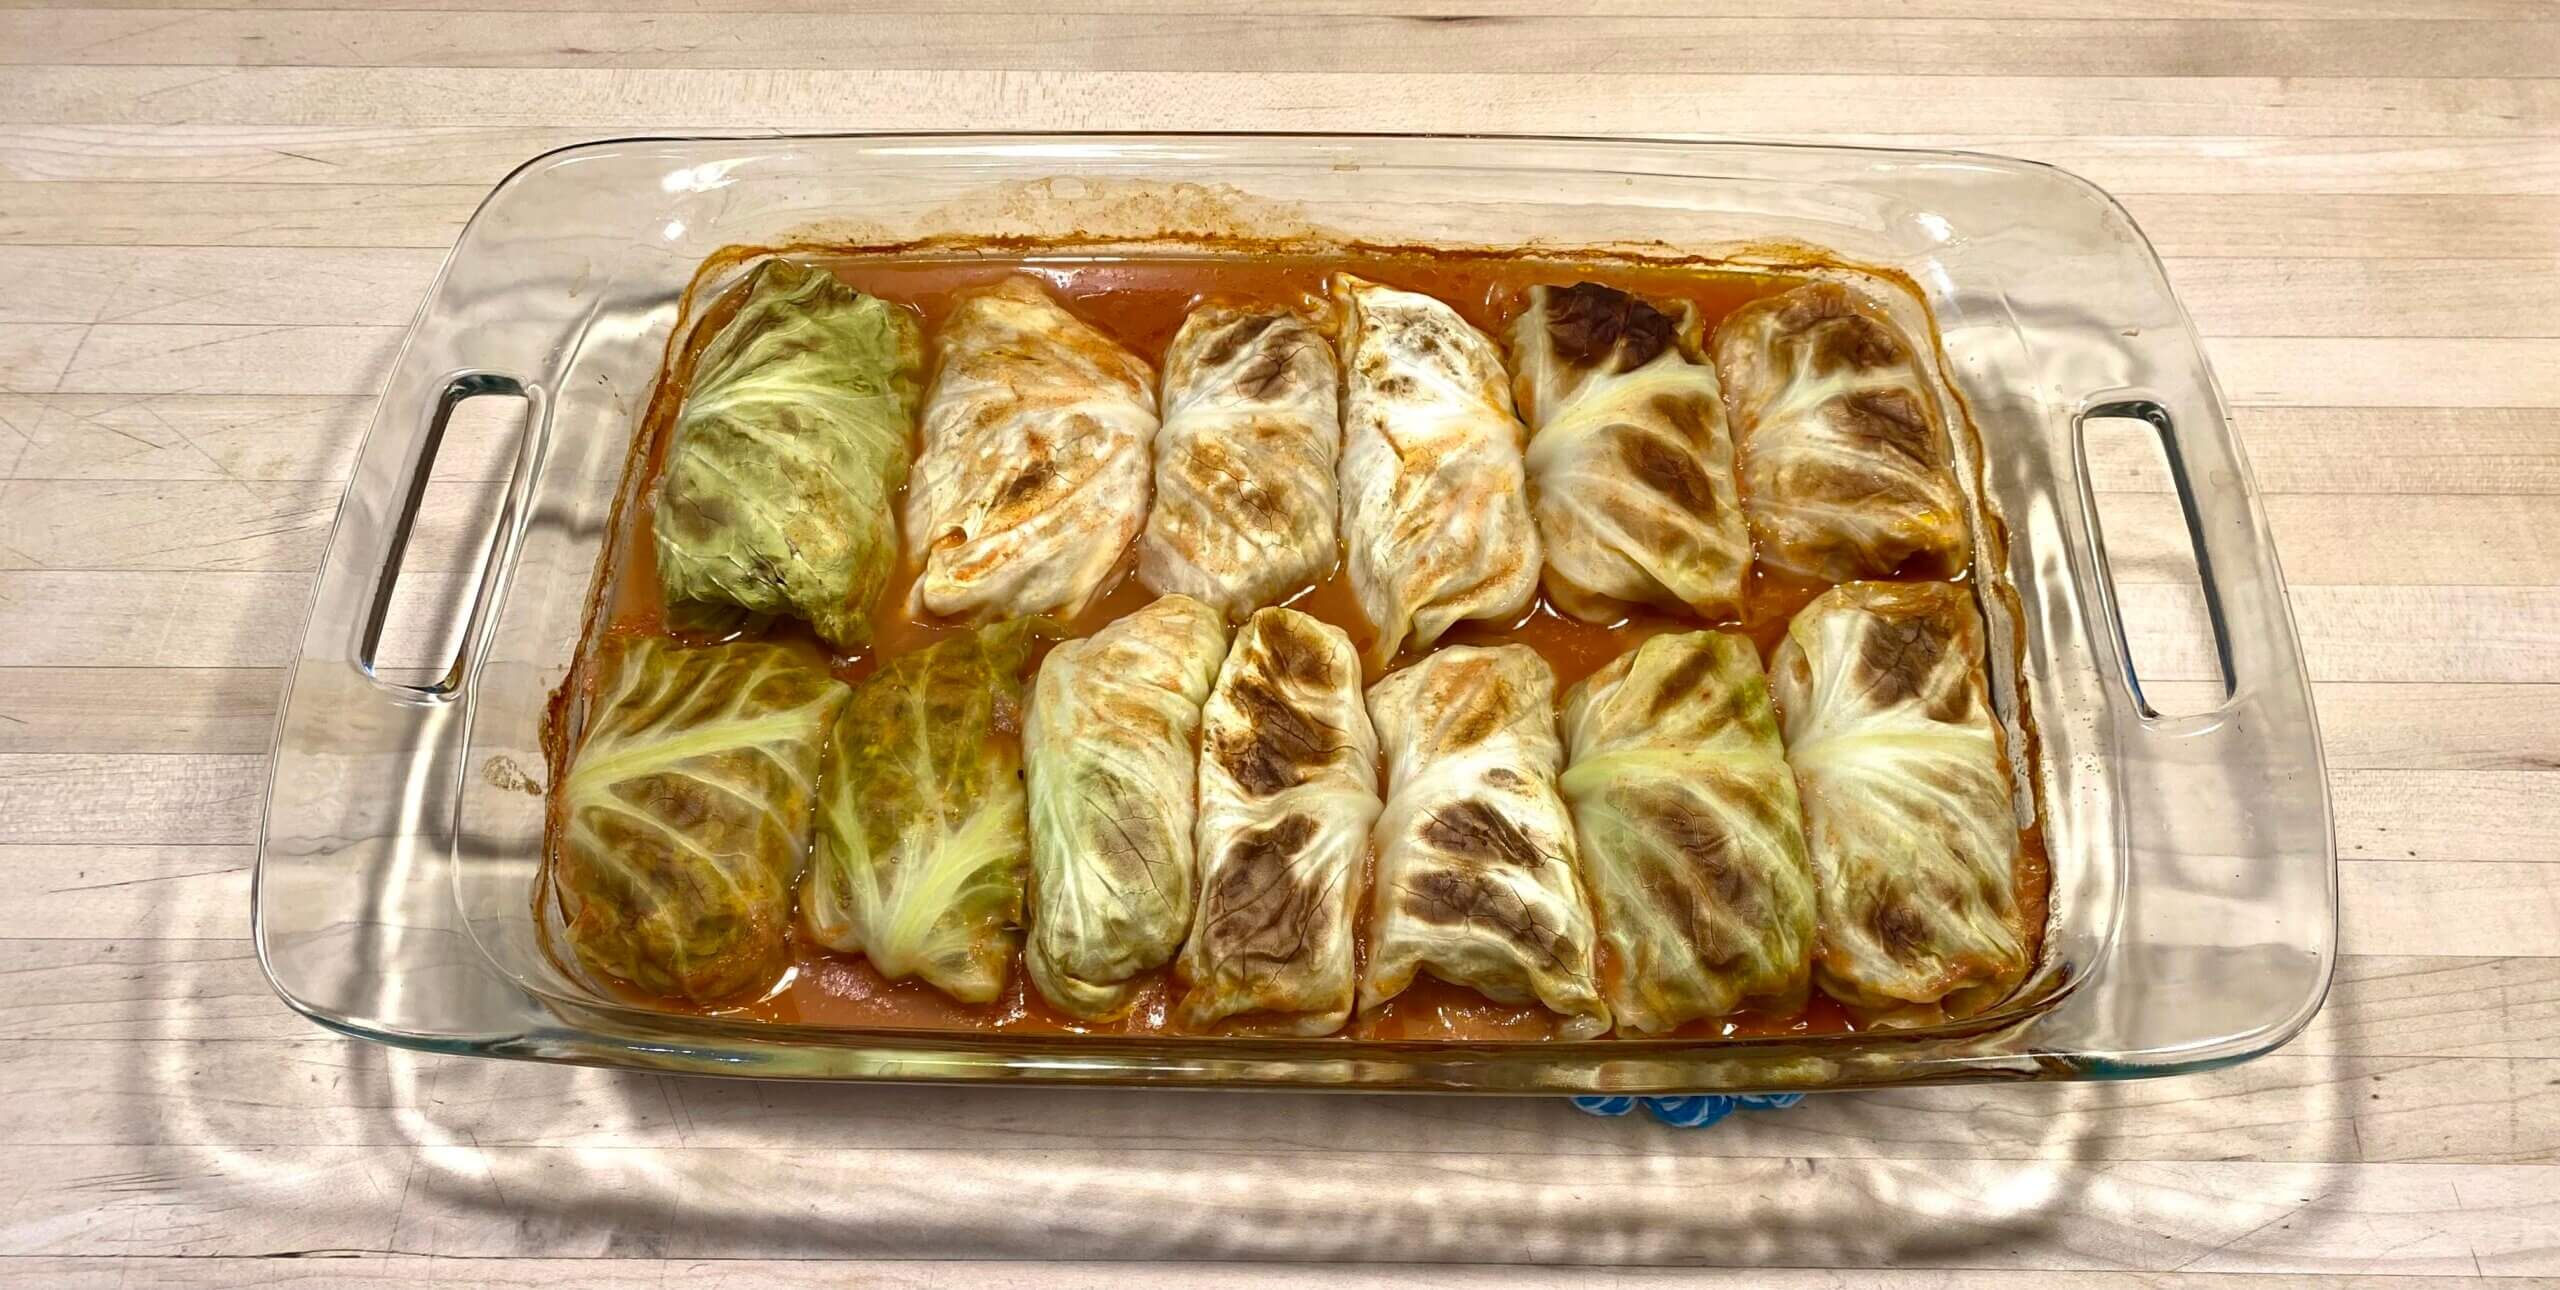 A glass baking dish sits atop a light-wash wood surface. The dish contains thirteen stuffed and rolled cabbage leaves submerged in a brown gravy.